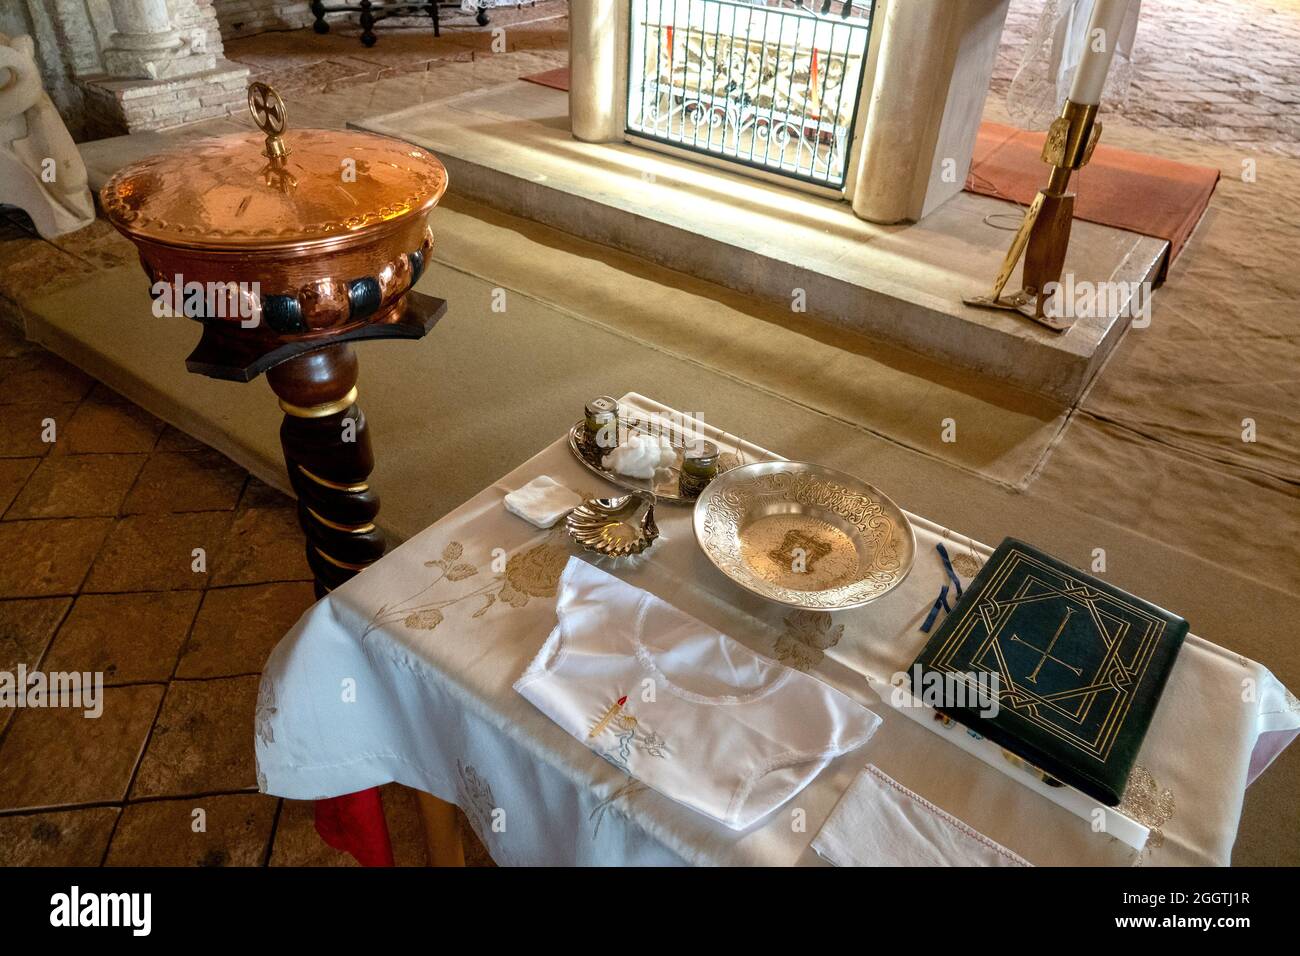 The baptismal font and liturgical instruments are ready for a baptism in the Crypt of the Cathedral of San Giustino, Chieti, Italy Stock Photo